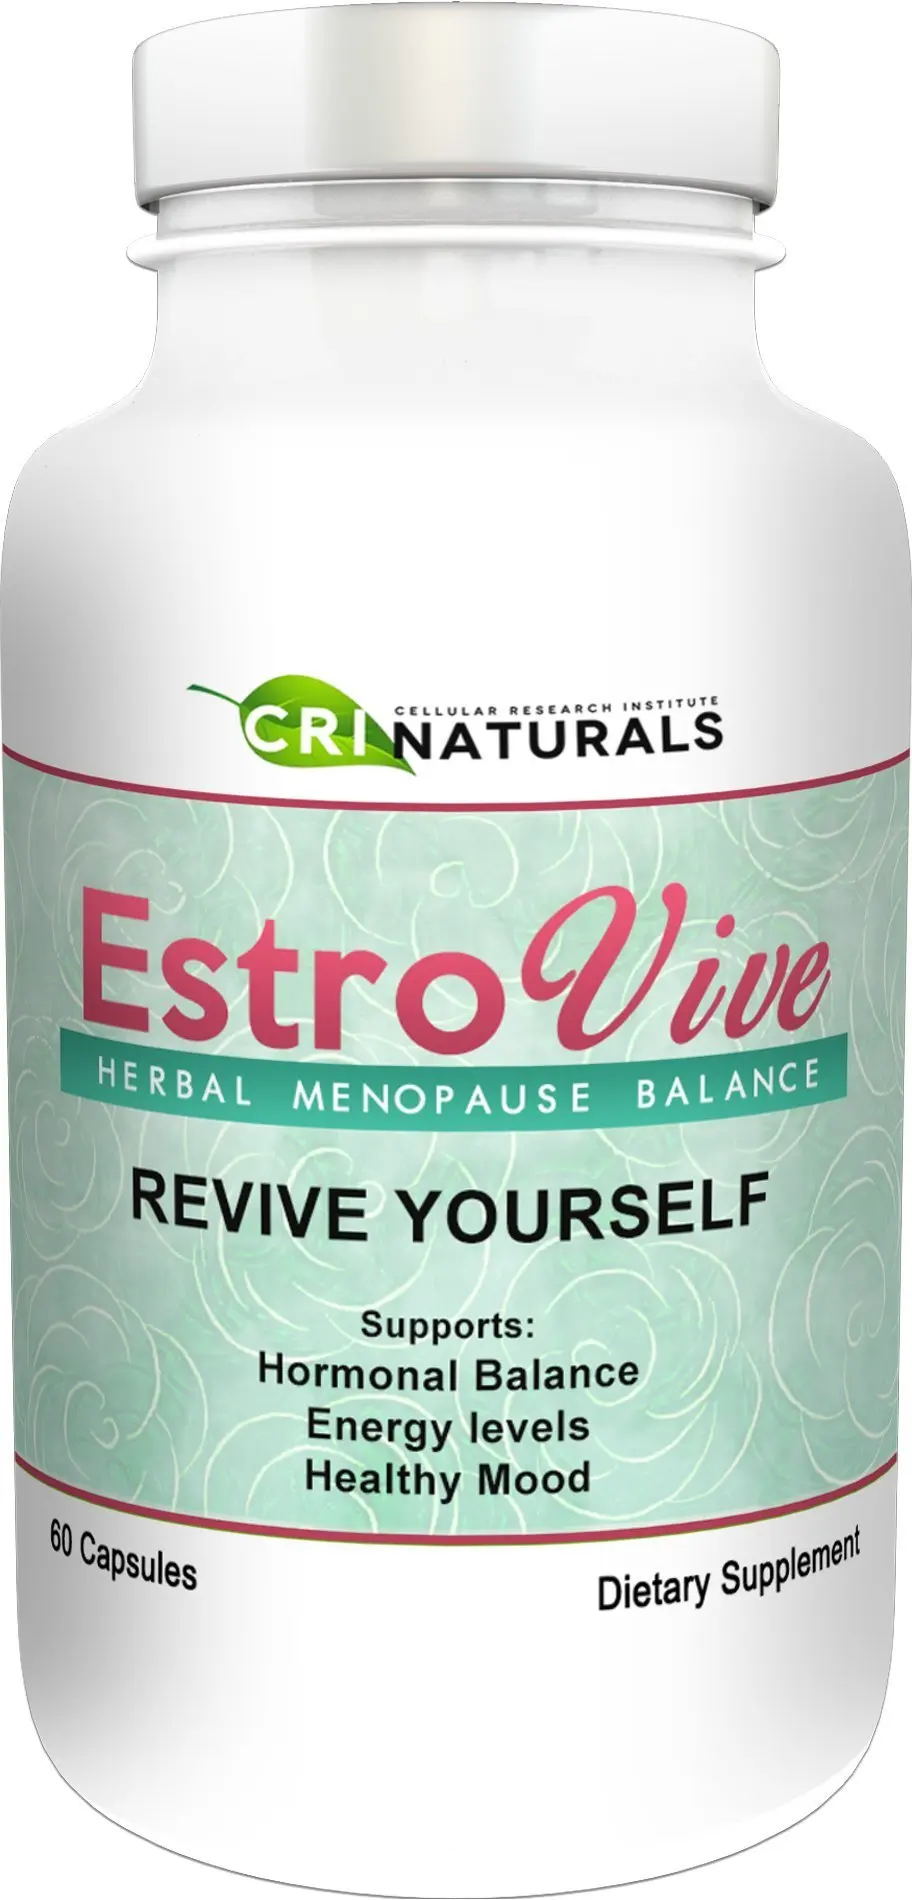 100/% Safe Menopause Relief Supplement No Estrogens All Natural Instant Relief of Hot Flashes HOT FLASH ELIMINATOR - 1 Month Supply by Hot Flash Eliminator Mood Swings PMS Night Sweats